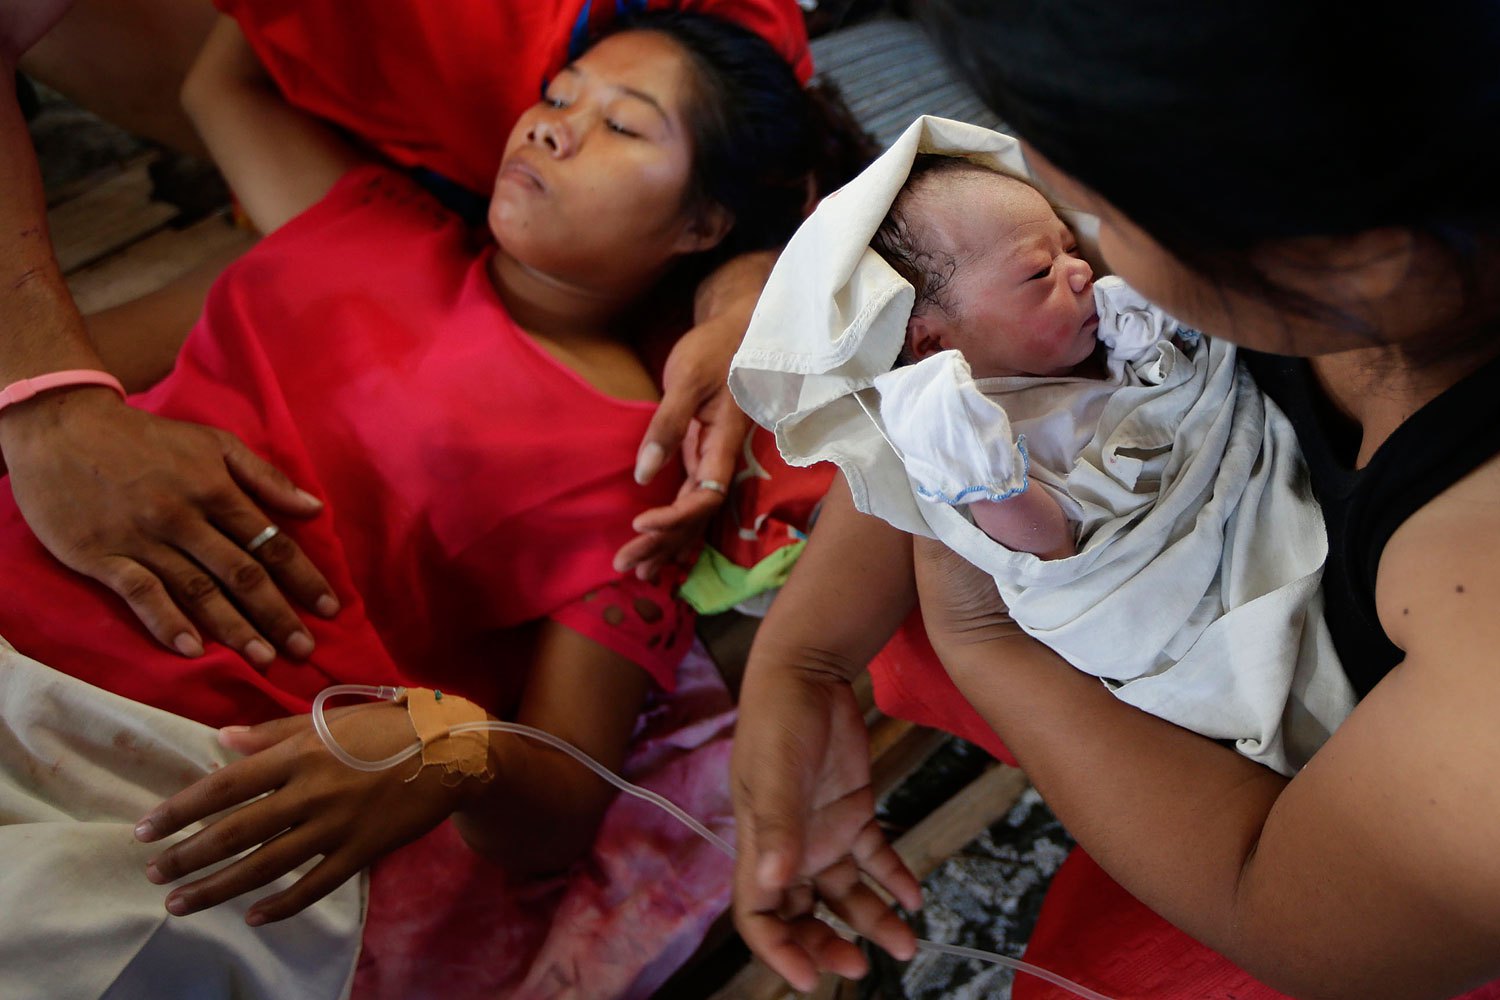 Emily Ortega, 21, gives birth to baby girl Bea Joy, after being in labor for five hours at an improvised clinic at Tacloban Airport in Tacloban city, central Philippines.